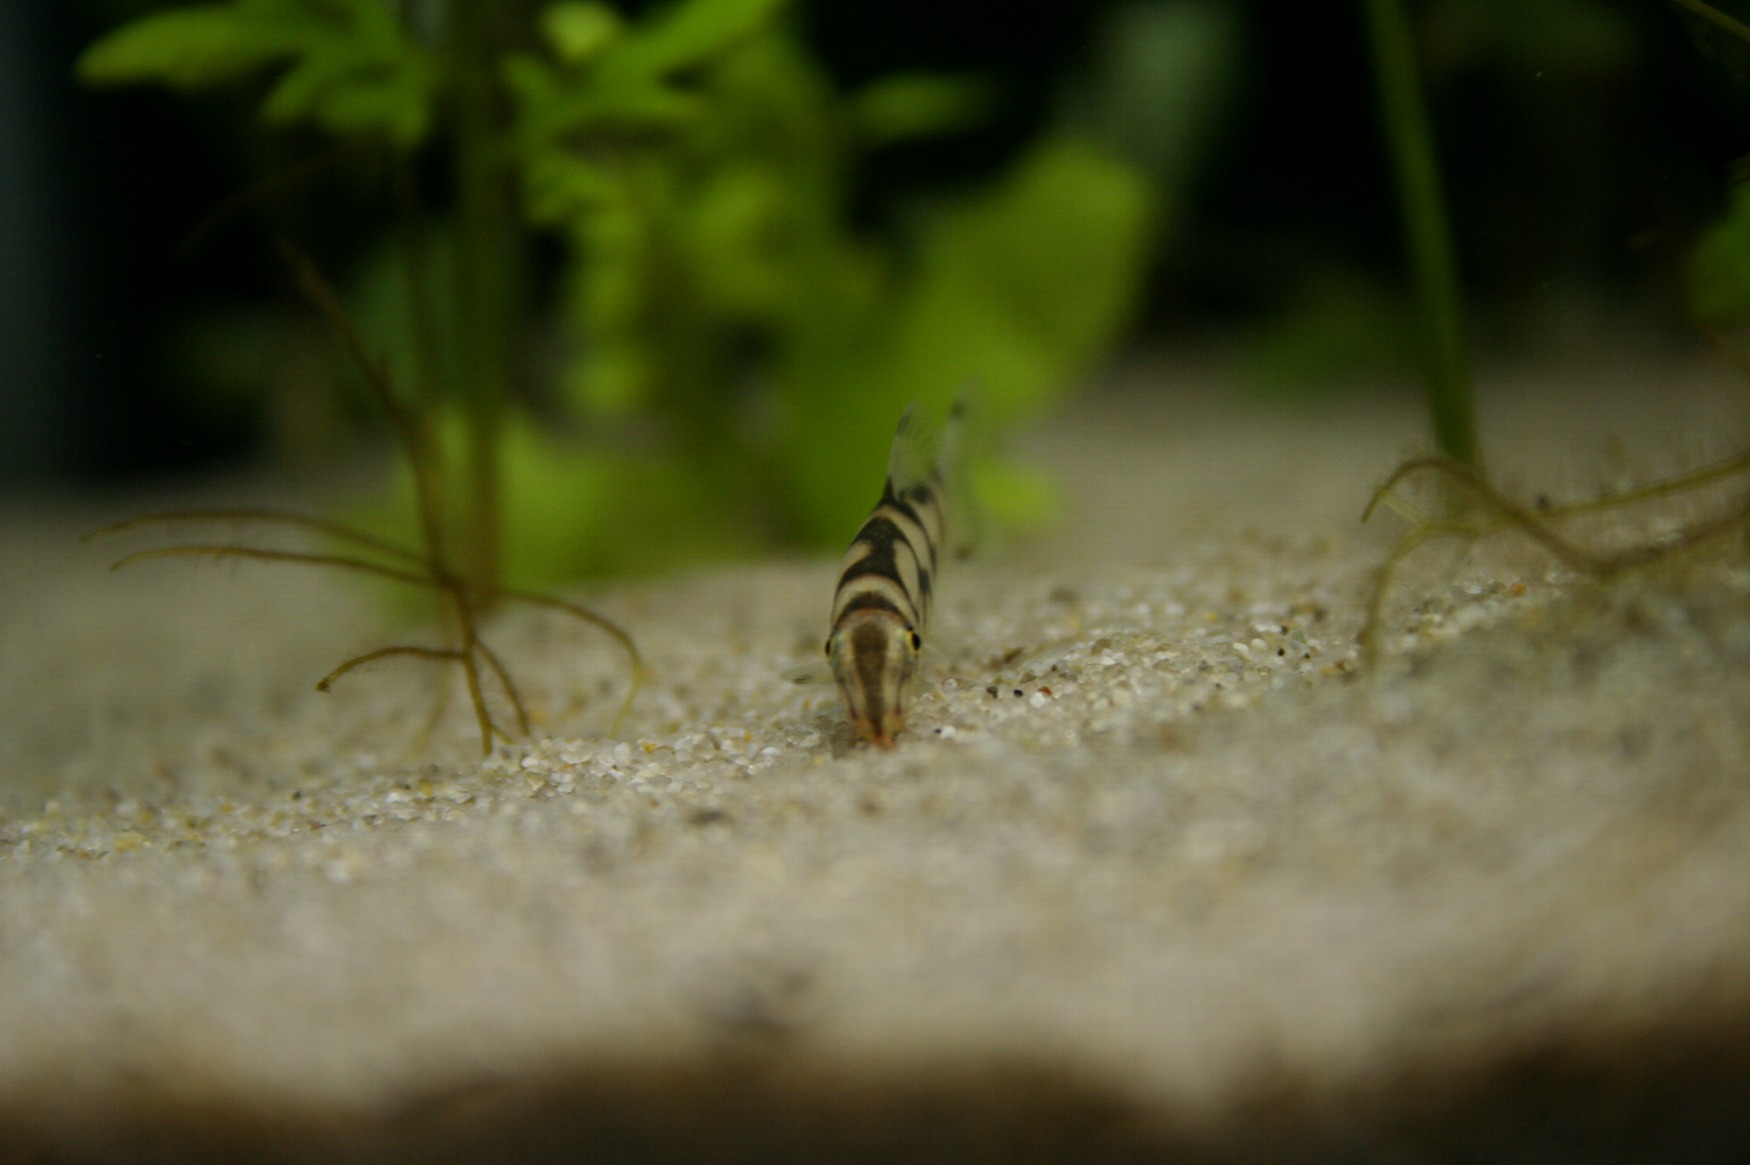 one of my new Yoyo Loaches